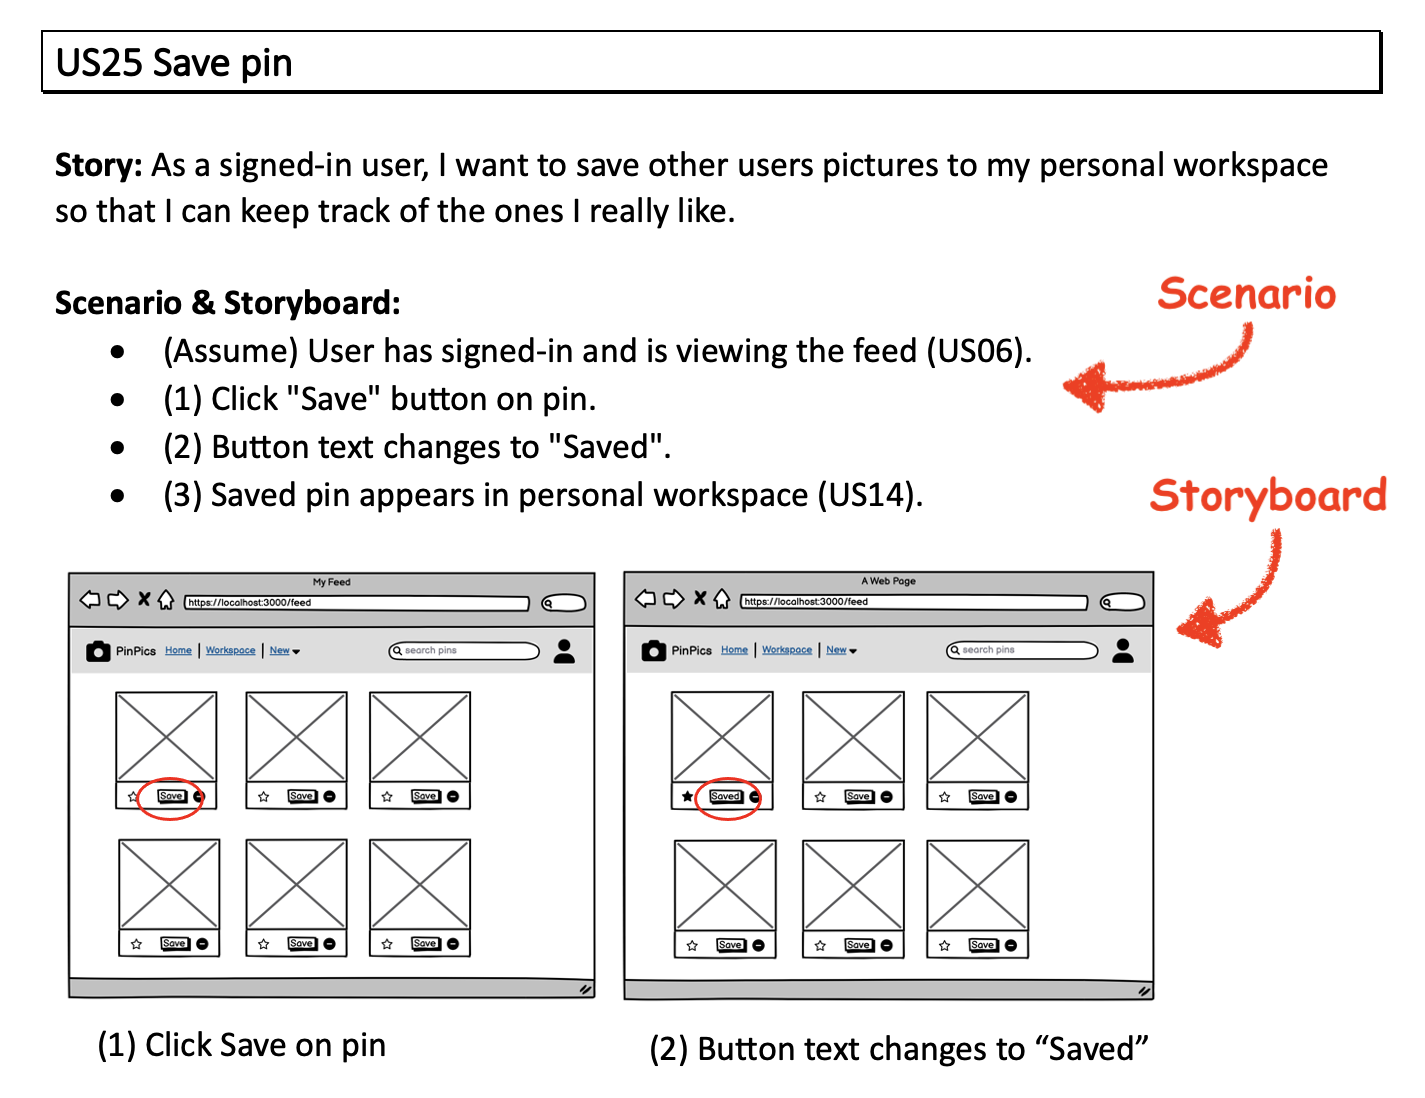 The previously given example user story now with an example user scenario and accompanying storyboard.